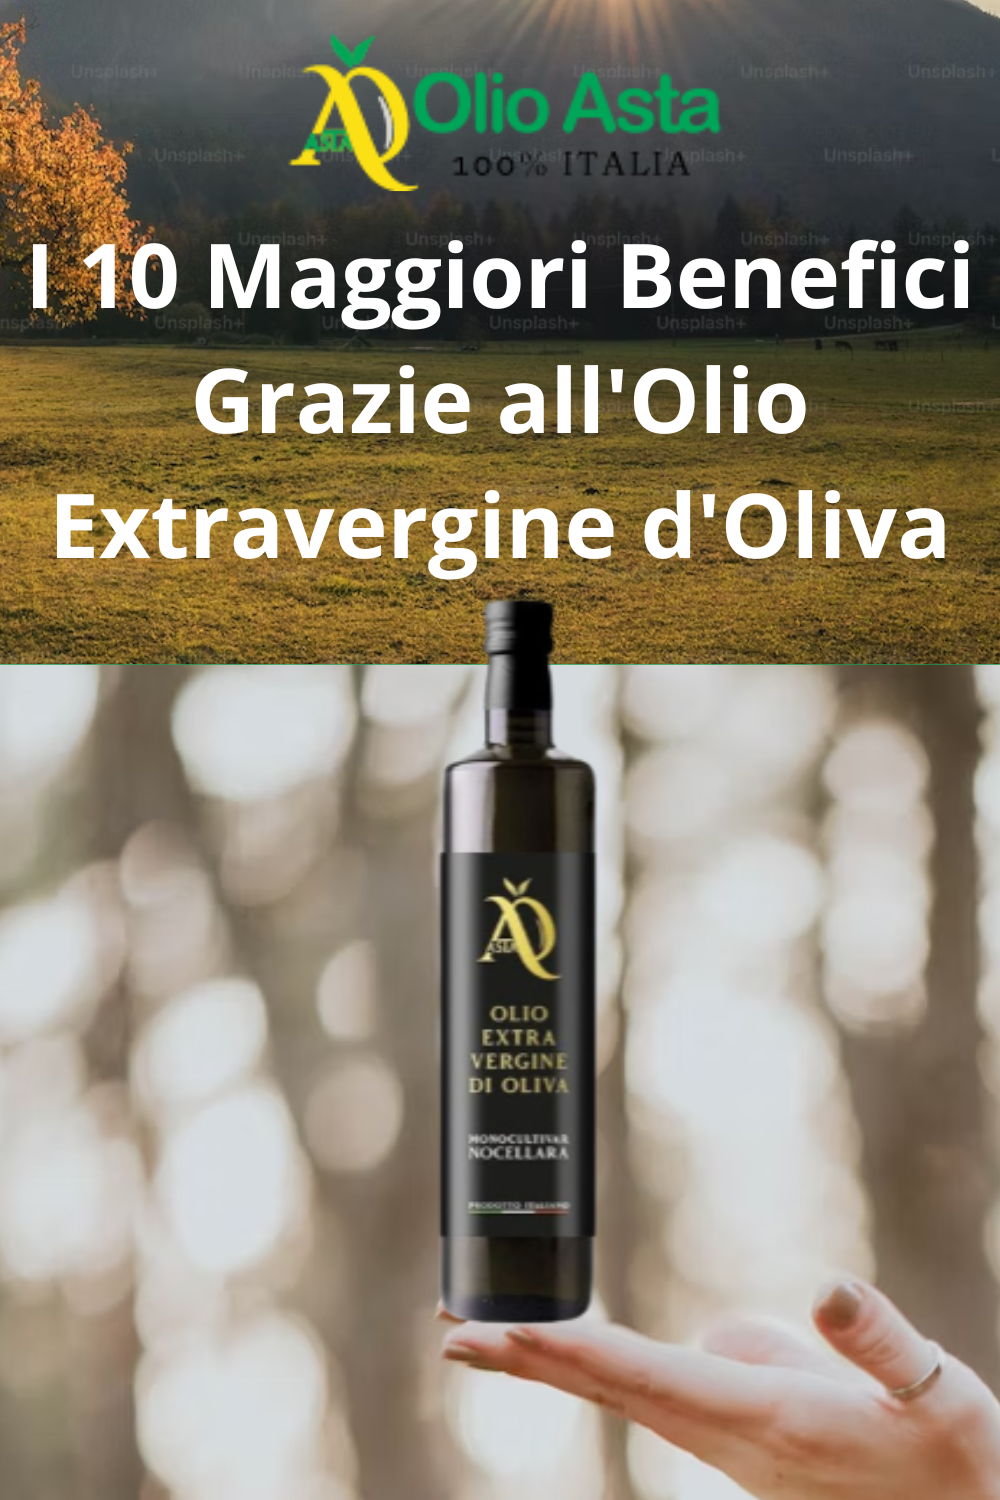 The 10 Major Benefits Thanks to Extra Virgin Olive Oil